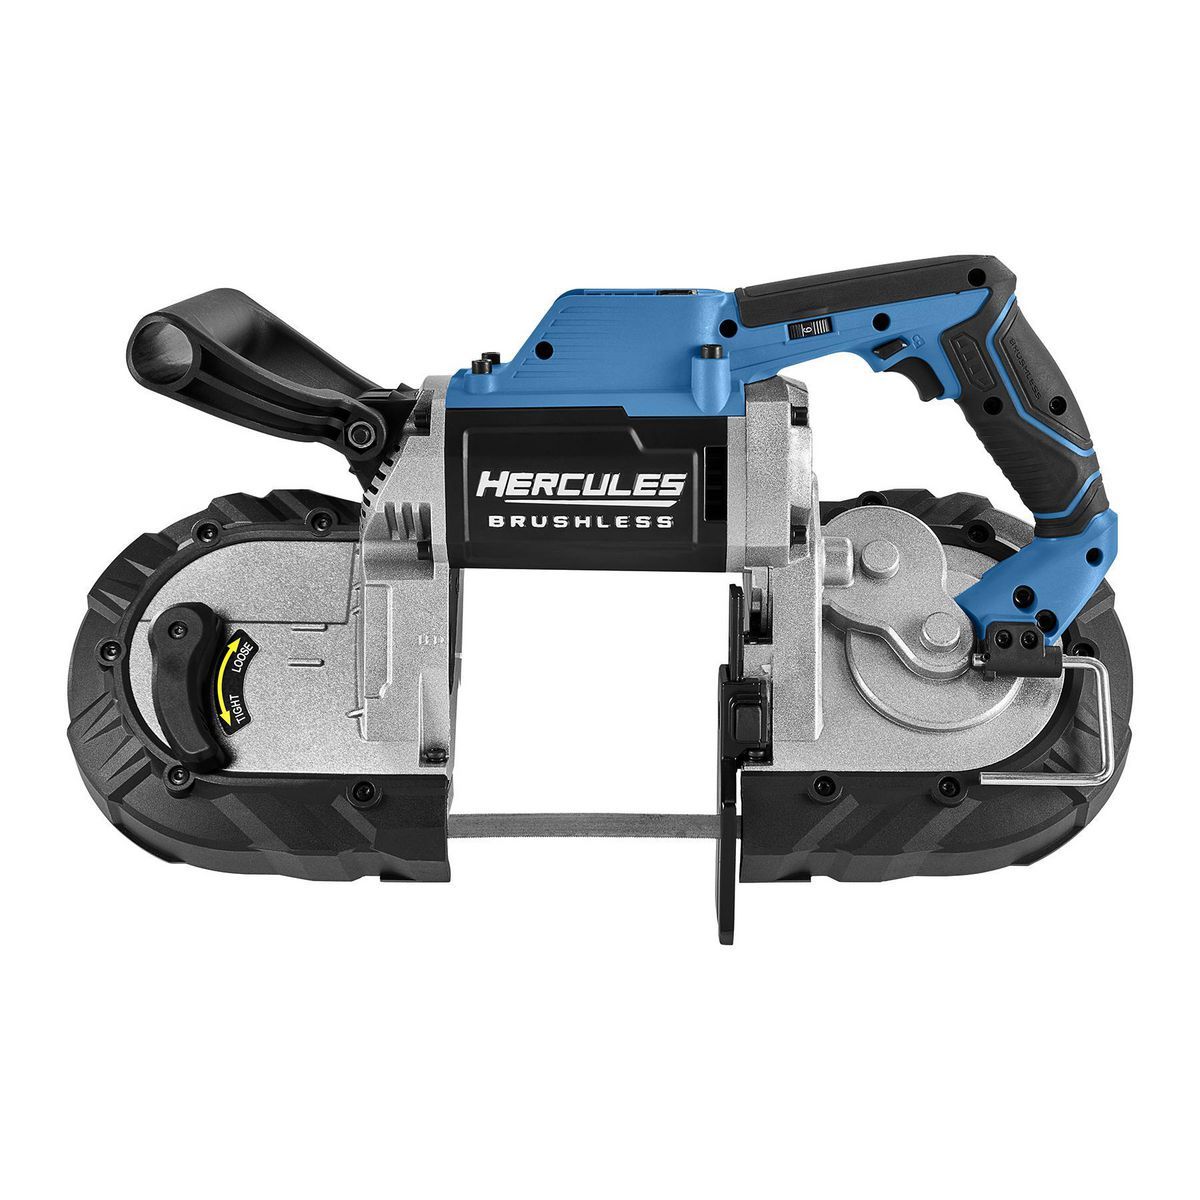 20V Brushless Cordless Deep Cut Band Saw - Tool Only